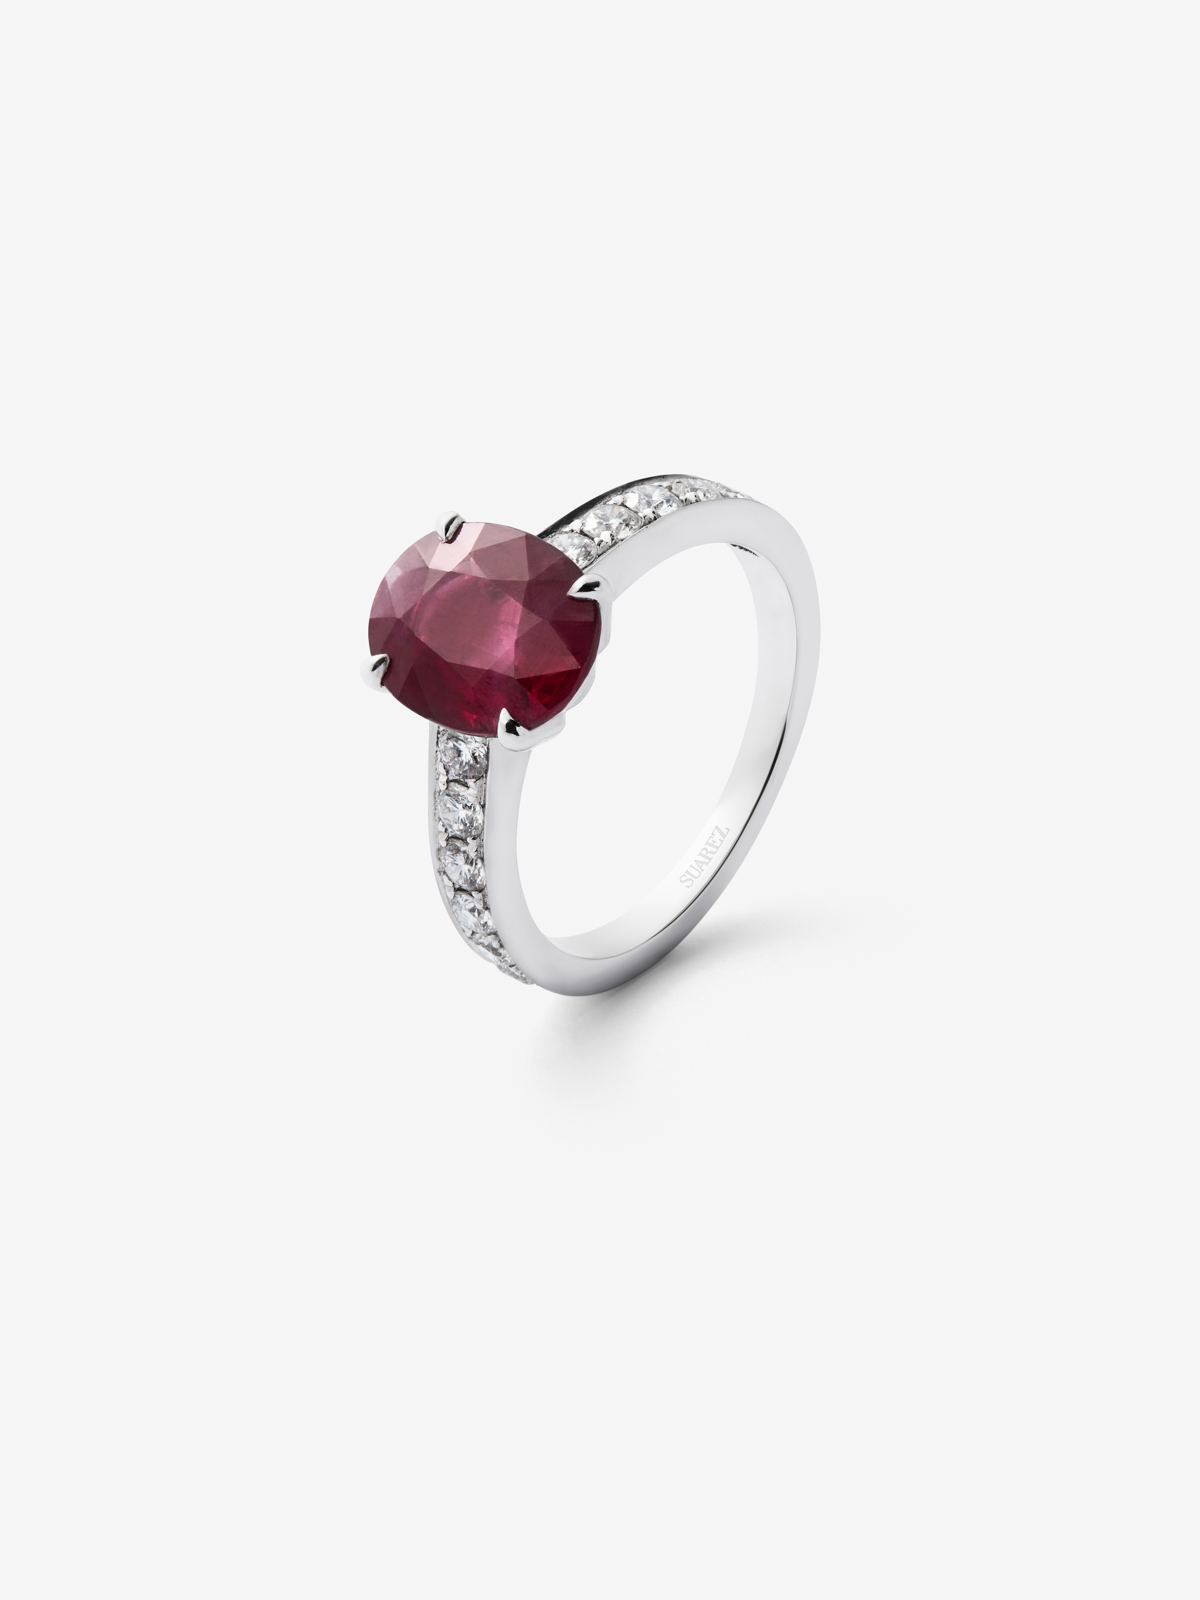 18K White Gold Ring with Red Ruby in 2.51 cts oval size and white diamonds of 0.51 cts